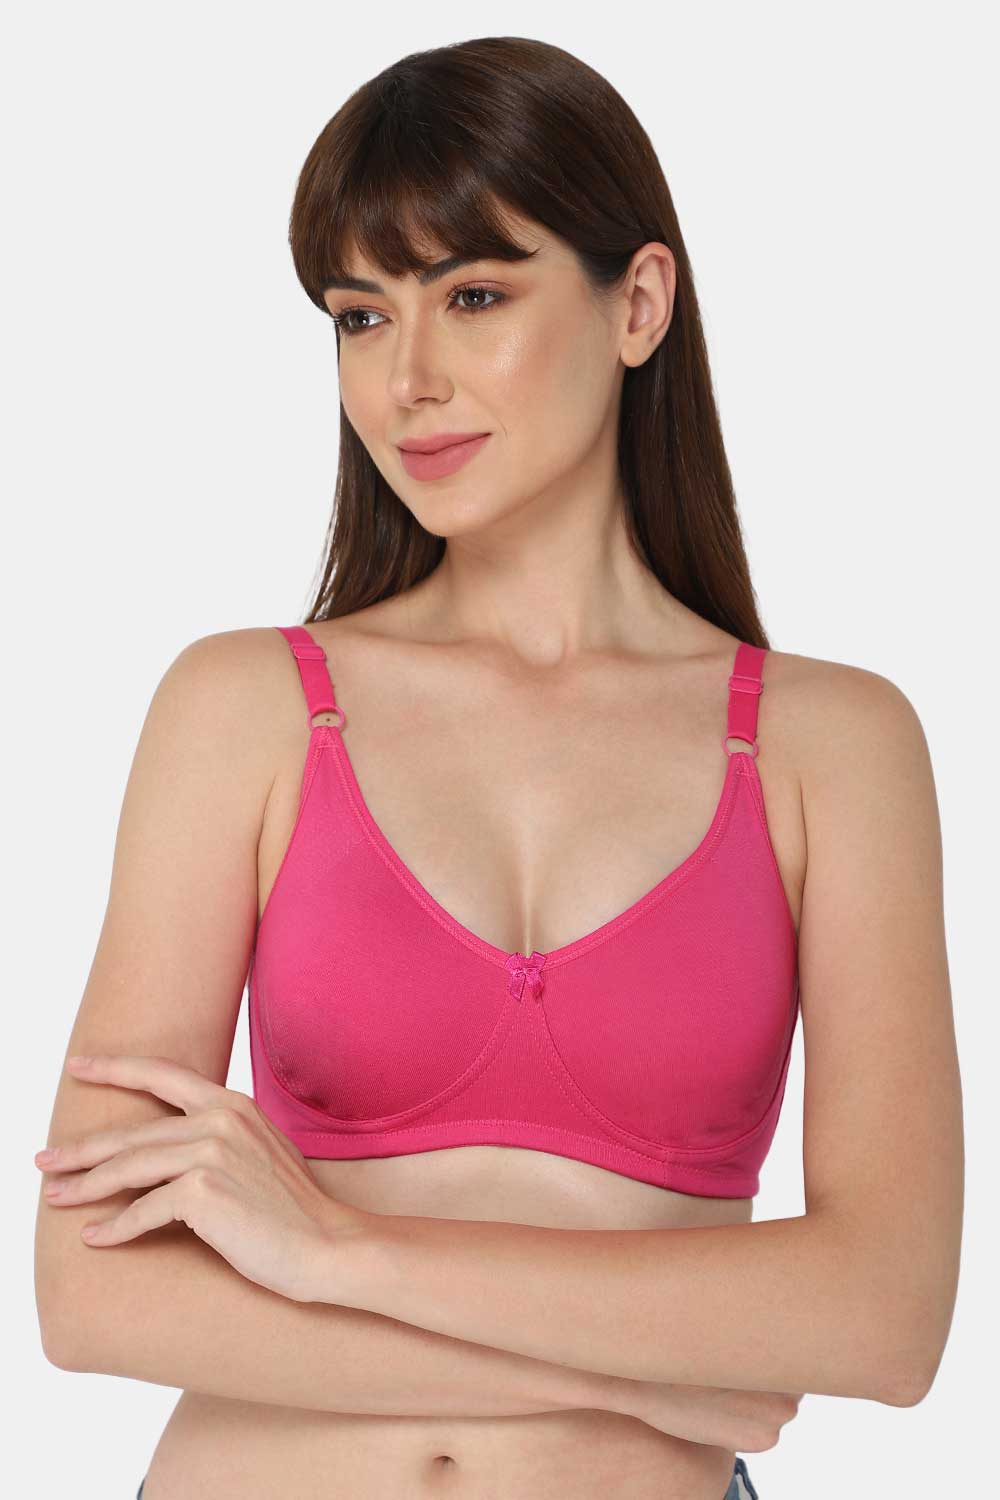 Strechable Velvet Attire Free Size Pink Color Sports Bra at Rs 599/piece in  Mumbai